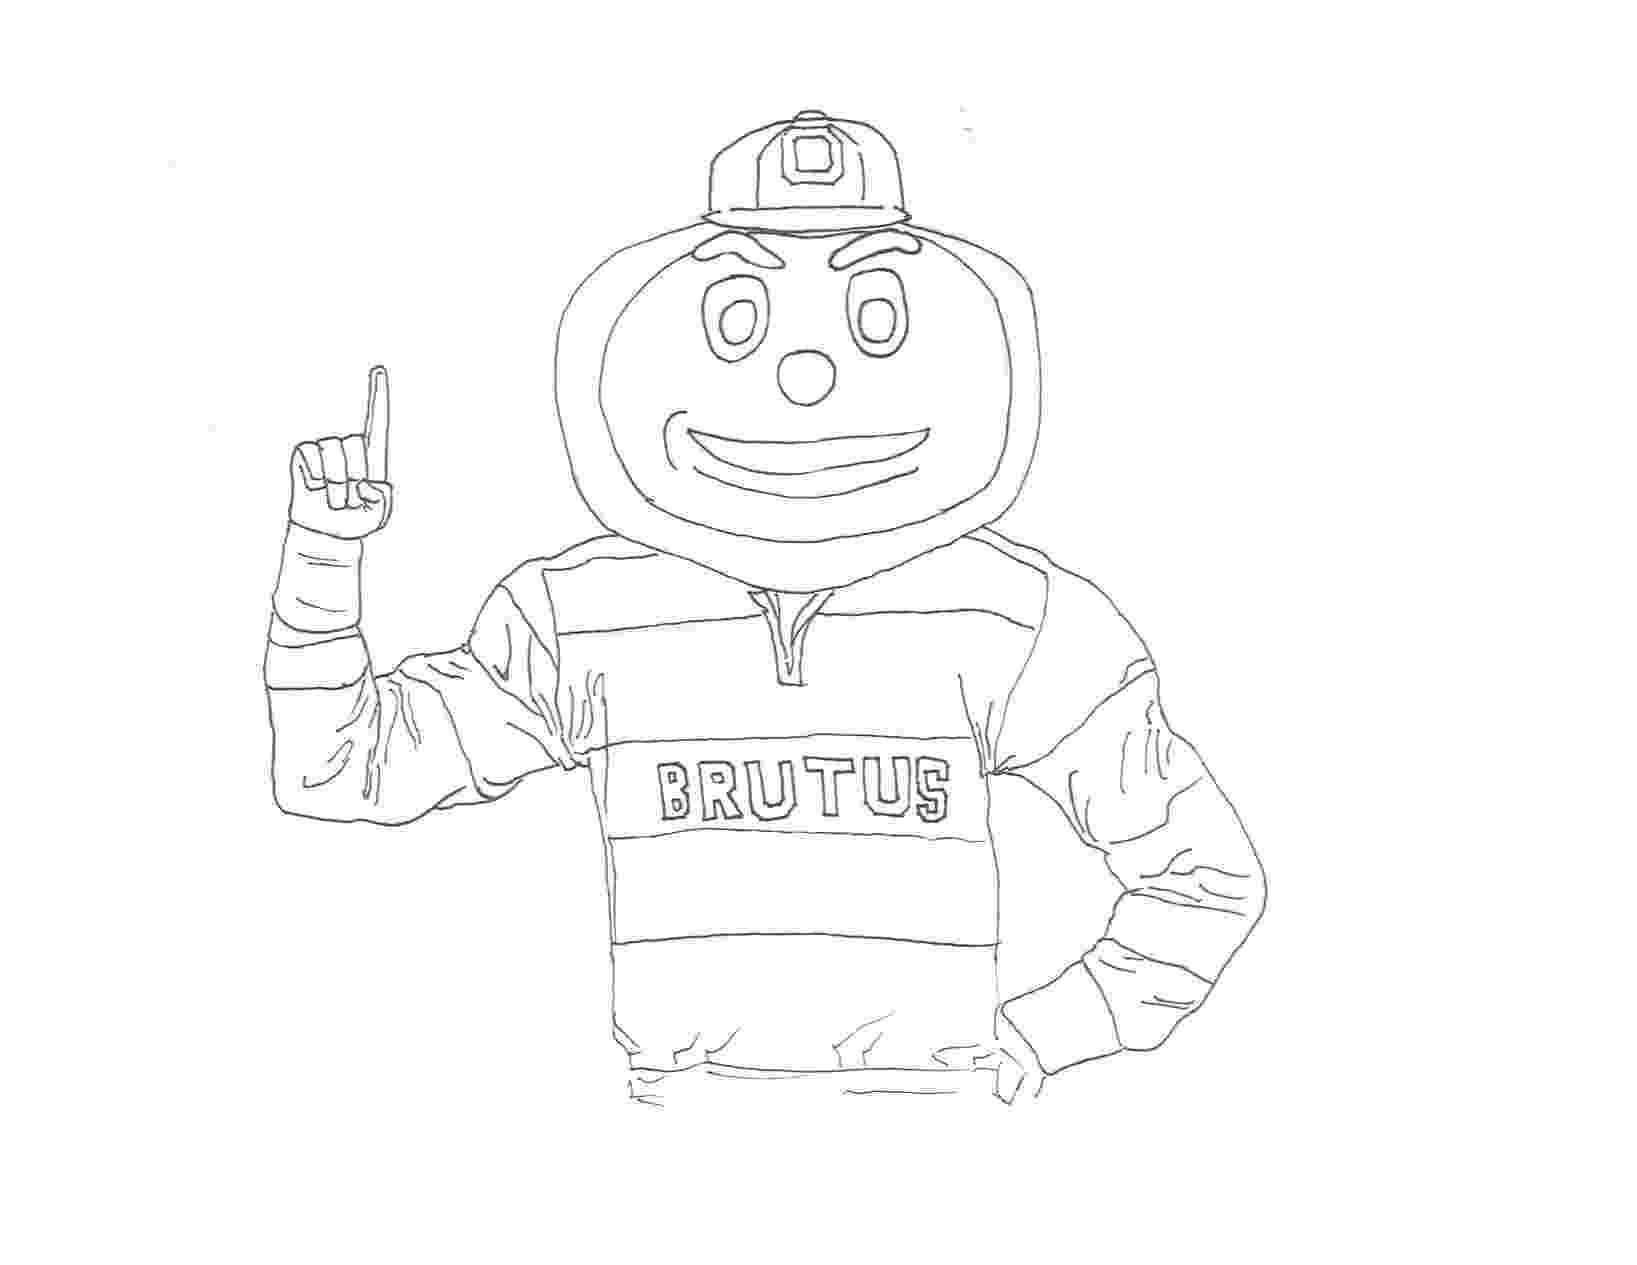 ohio state coloring pages ohio coloring sheets yahoo image search results pages state coloring ohio 